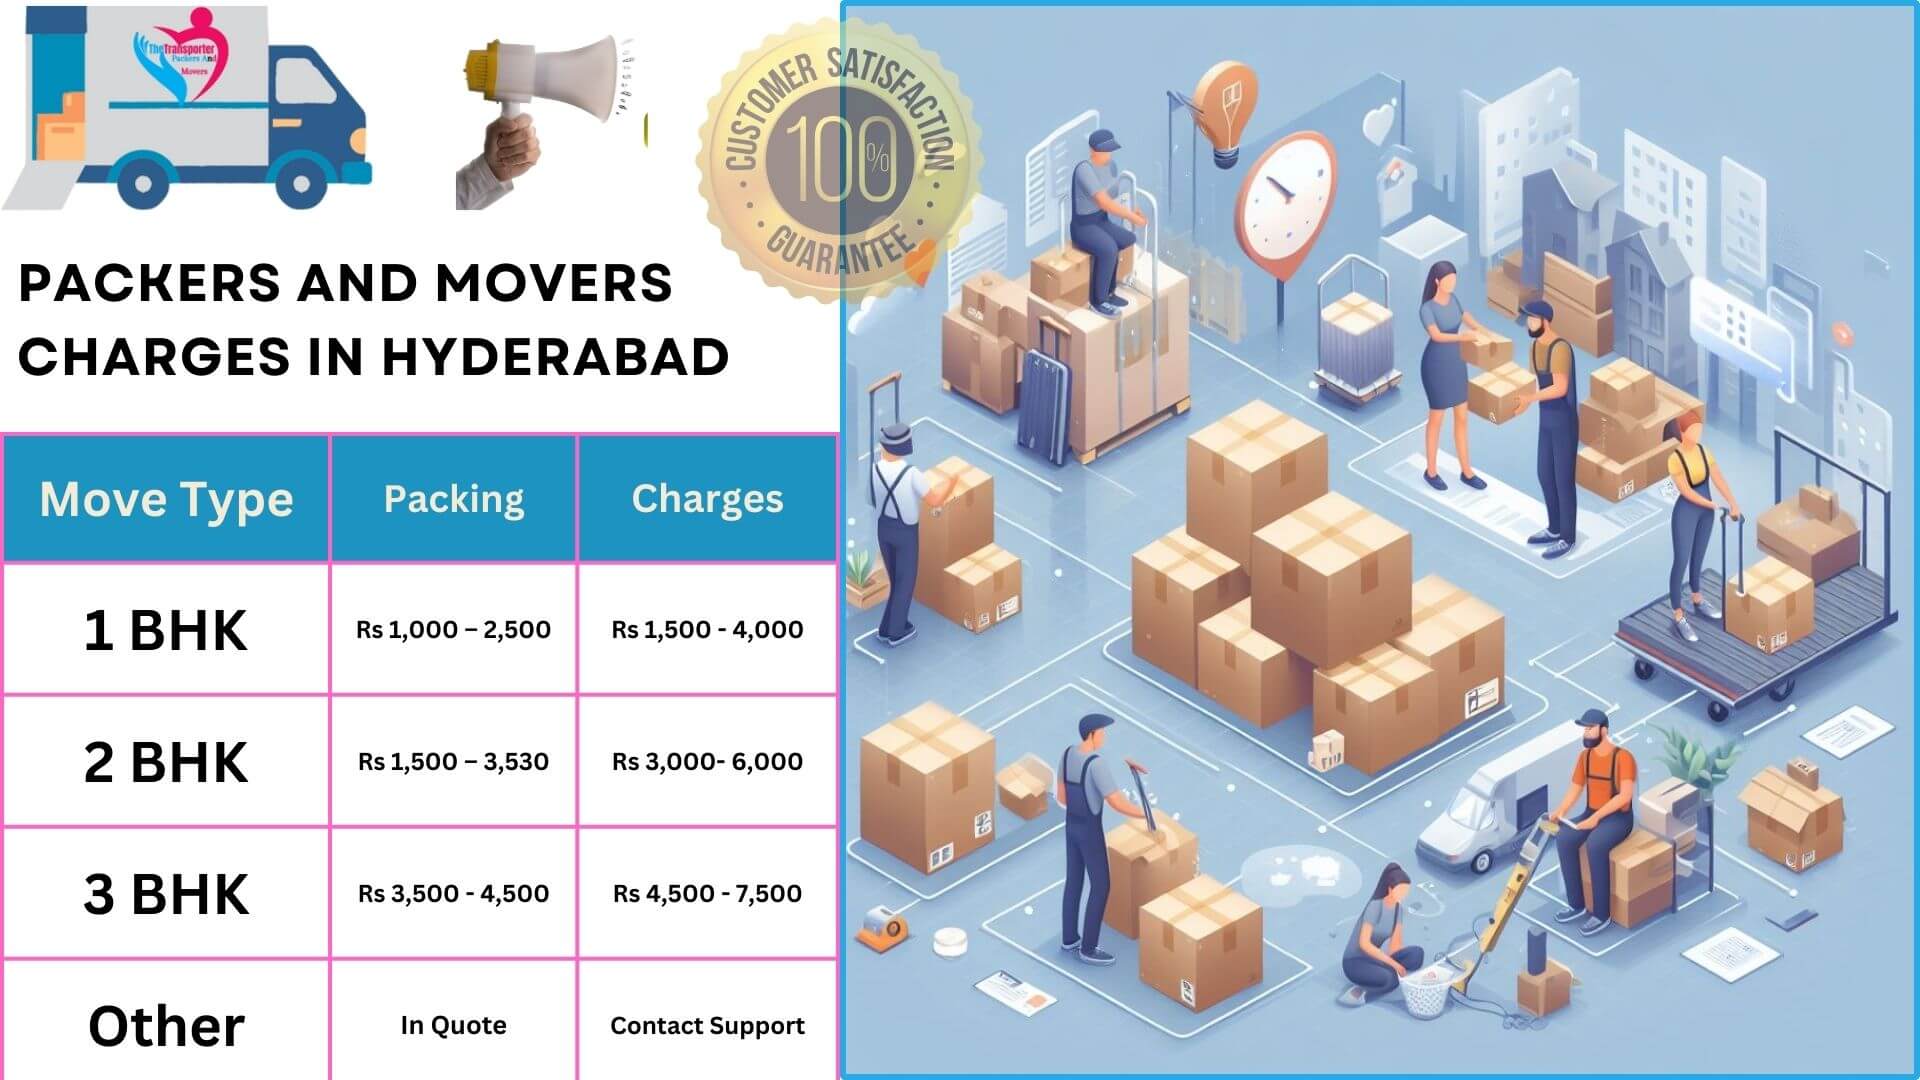 TheTransporter Packers and movers Charges list in Hyderabad 